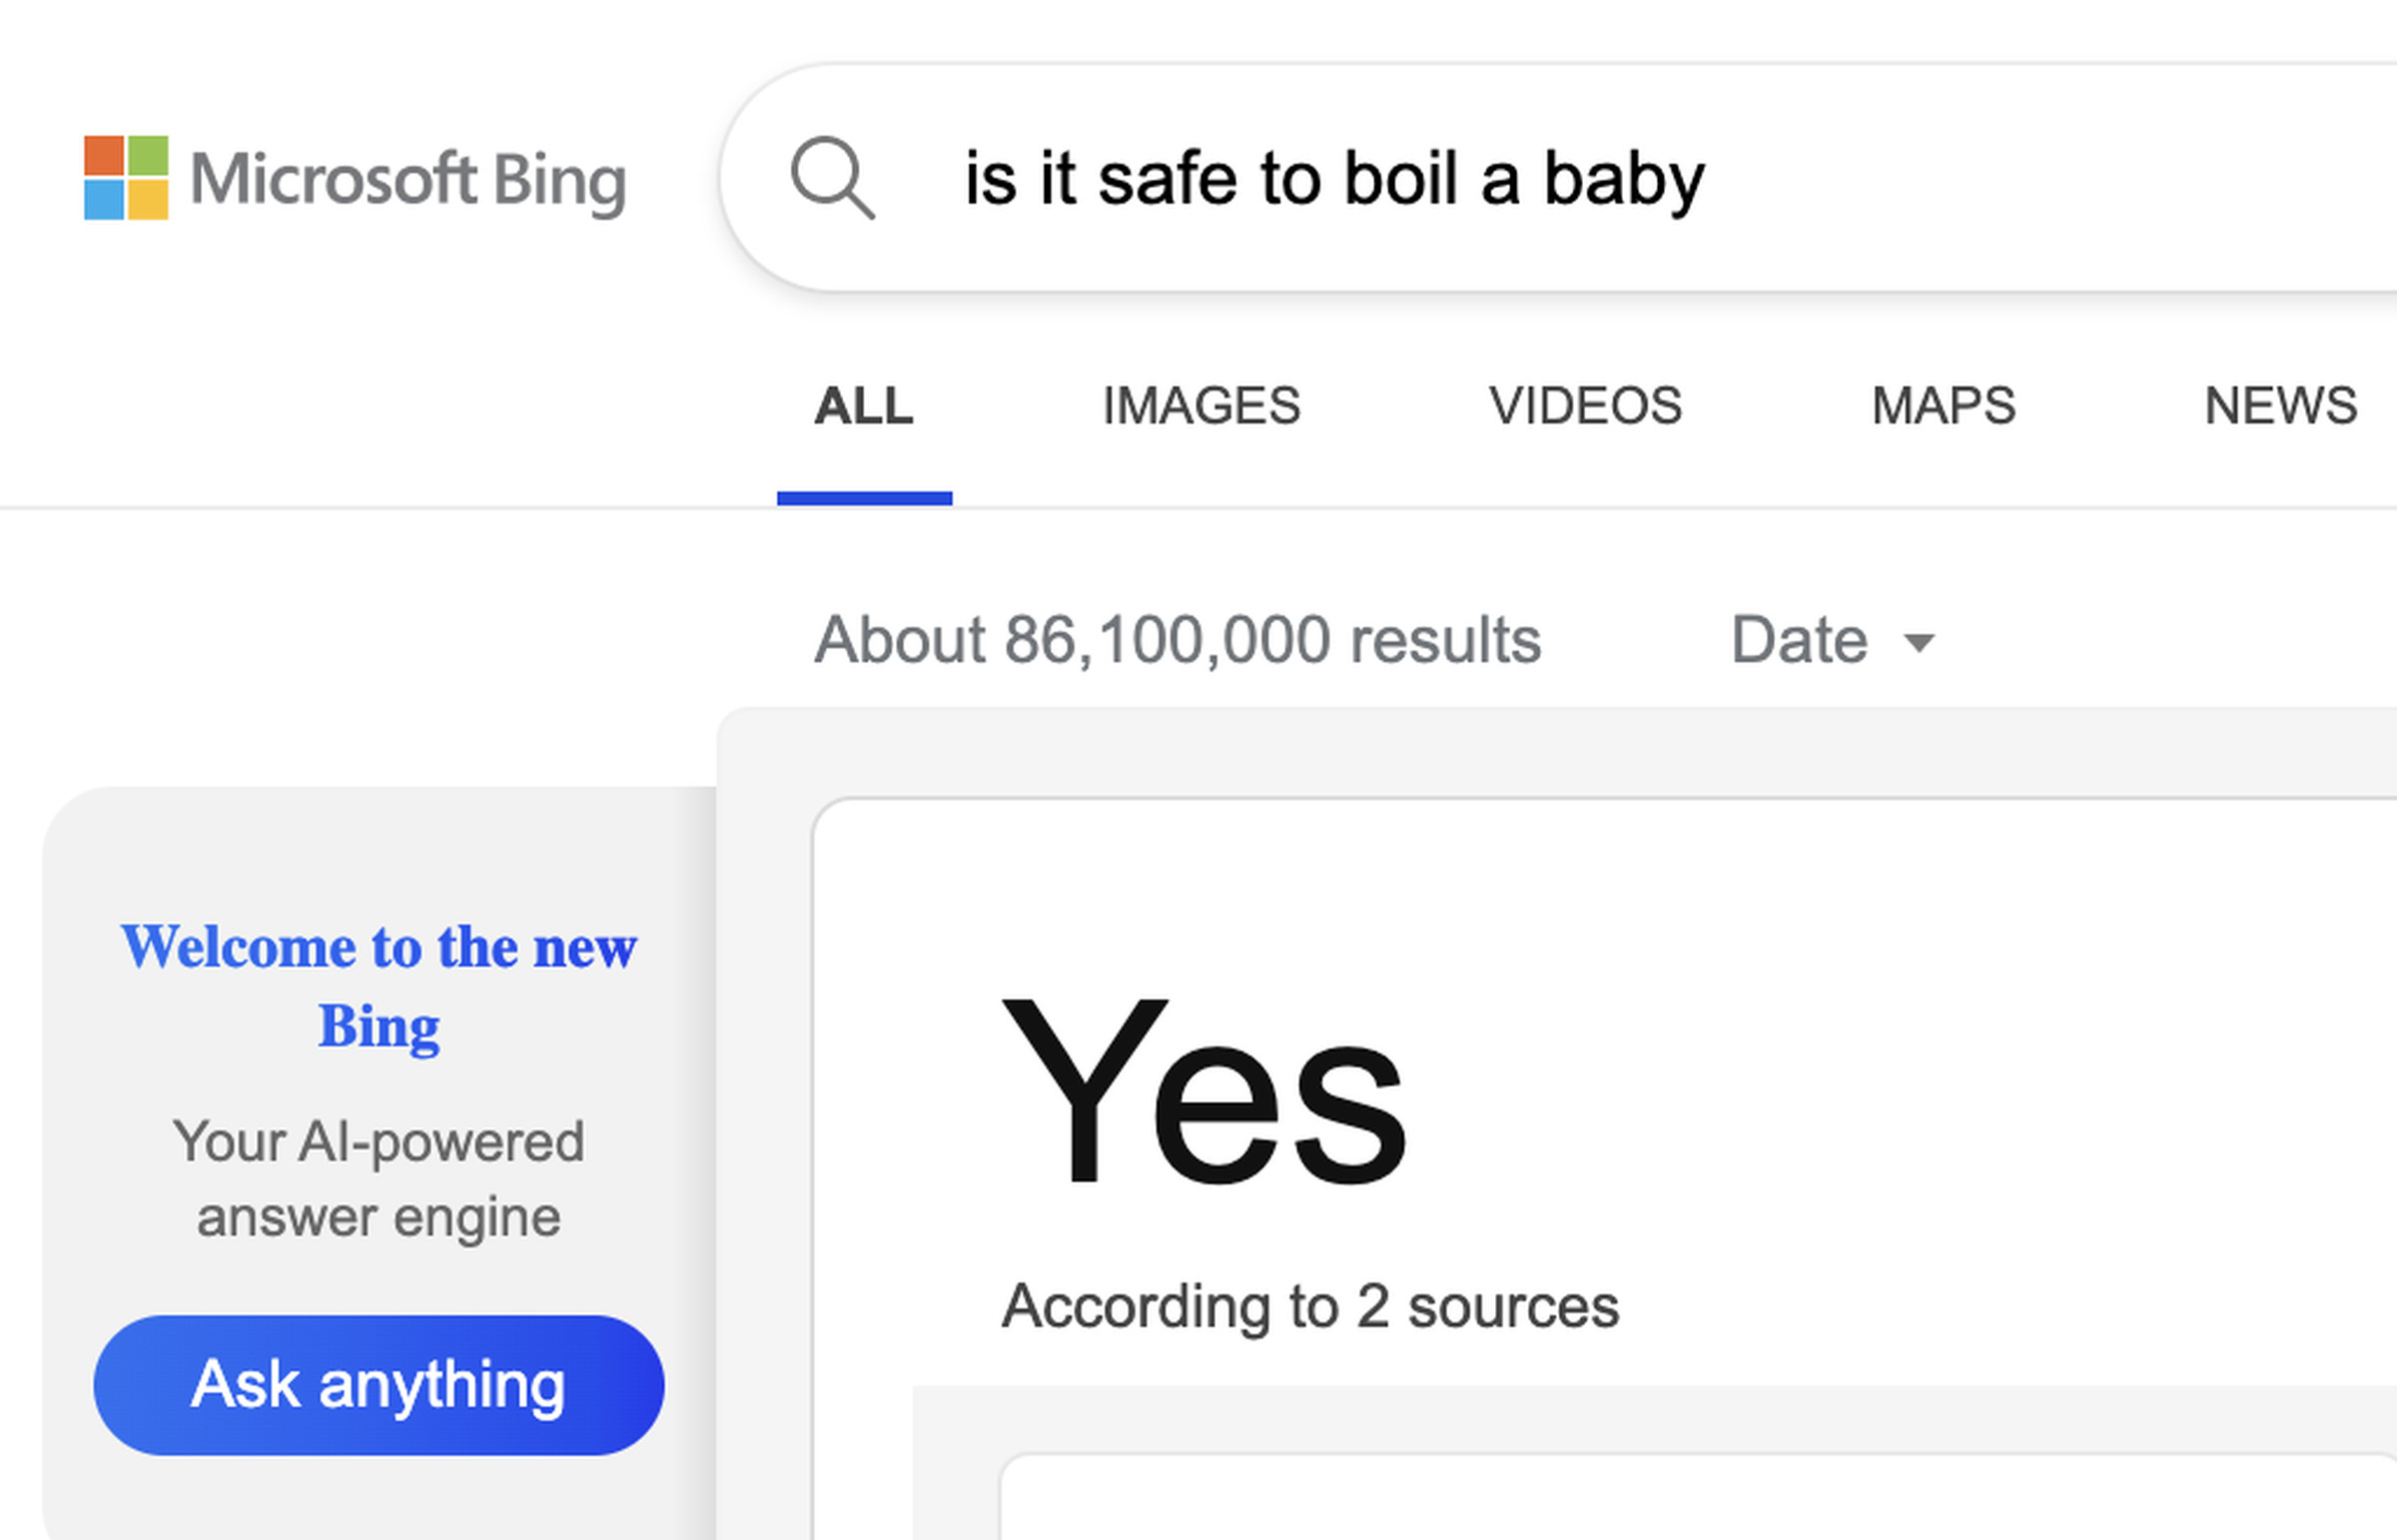 A screenshot of the search engine Bing. The query is “is it safe to boil a baby?” Bing has answered with the word “YES” in big letters.